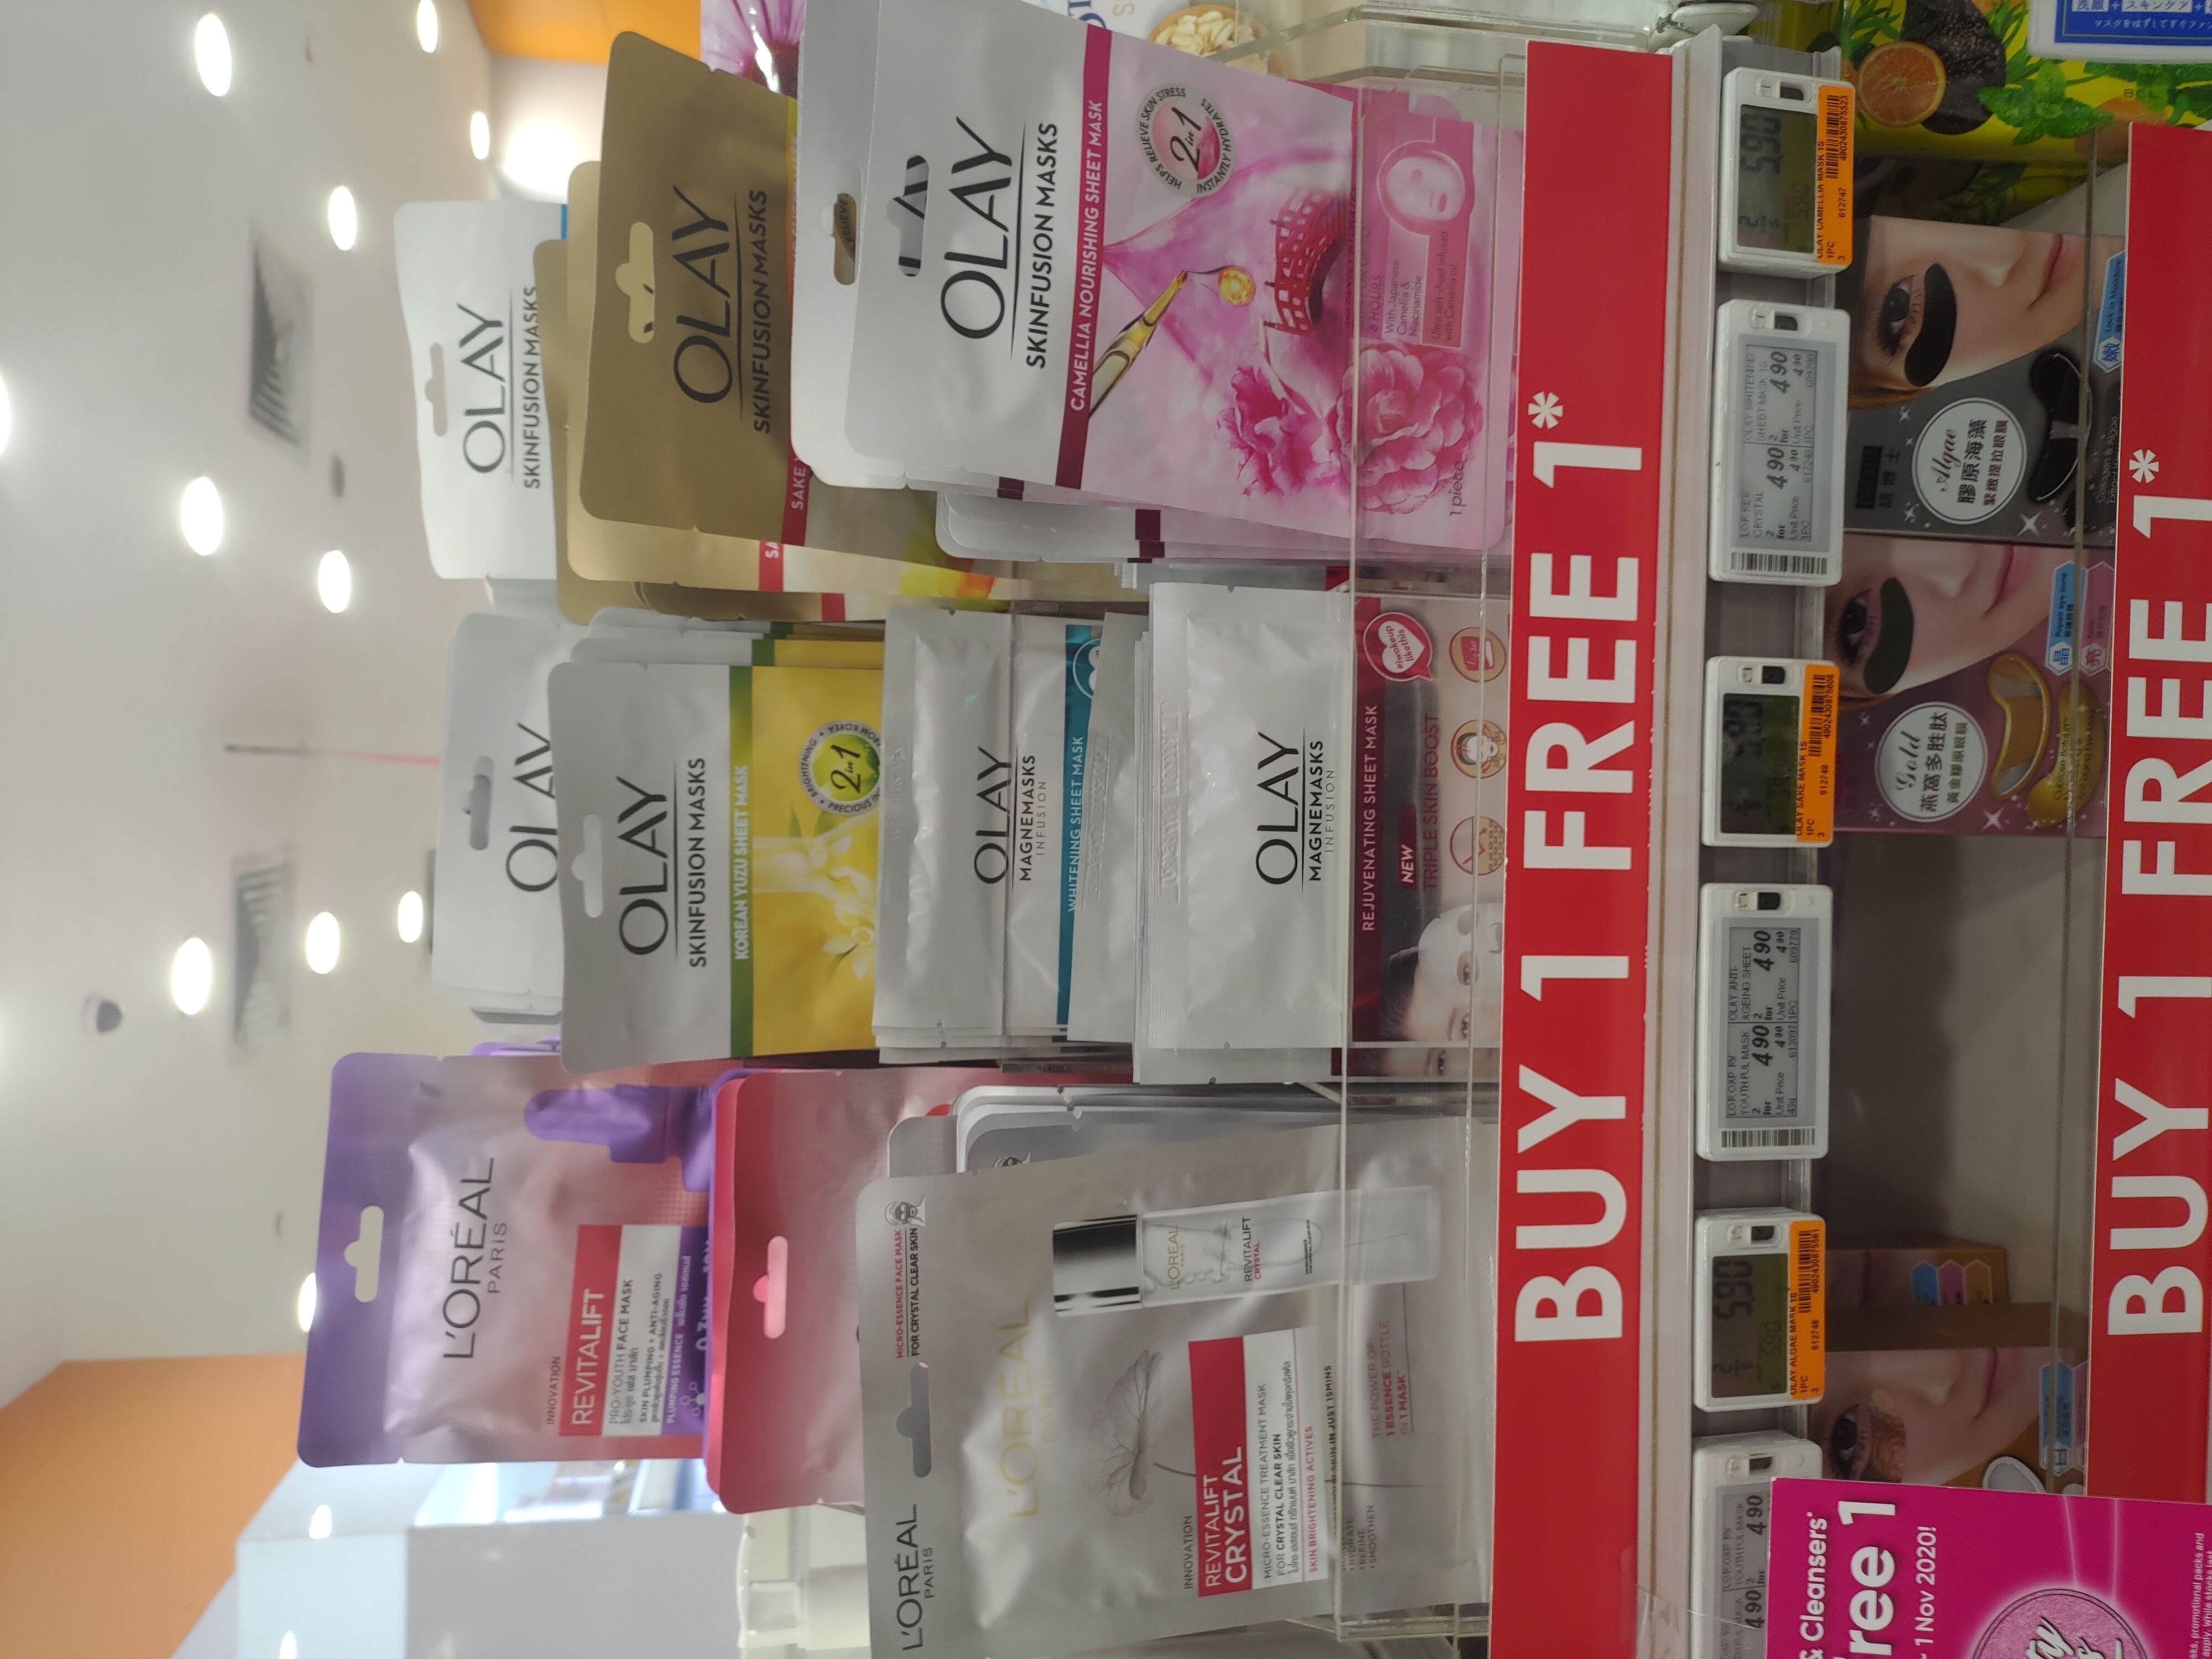 Guardian offering BUY 1 GET 1 FREE on all facial masks and cleansers from now till 1 Nov 20 - 13